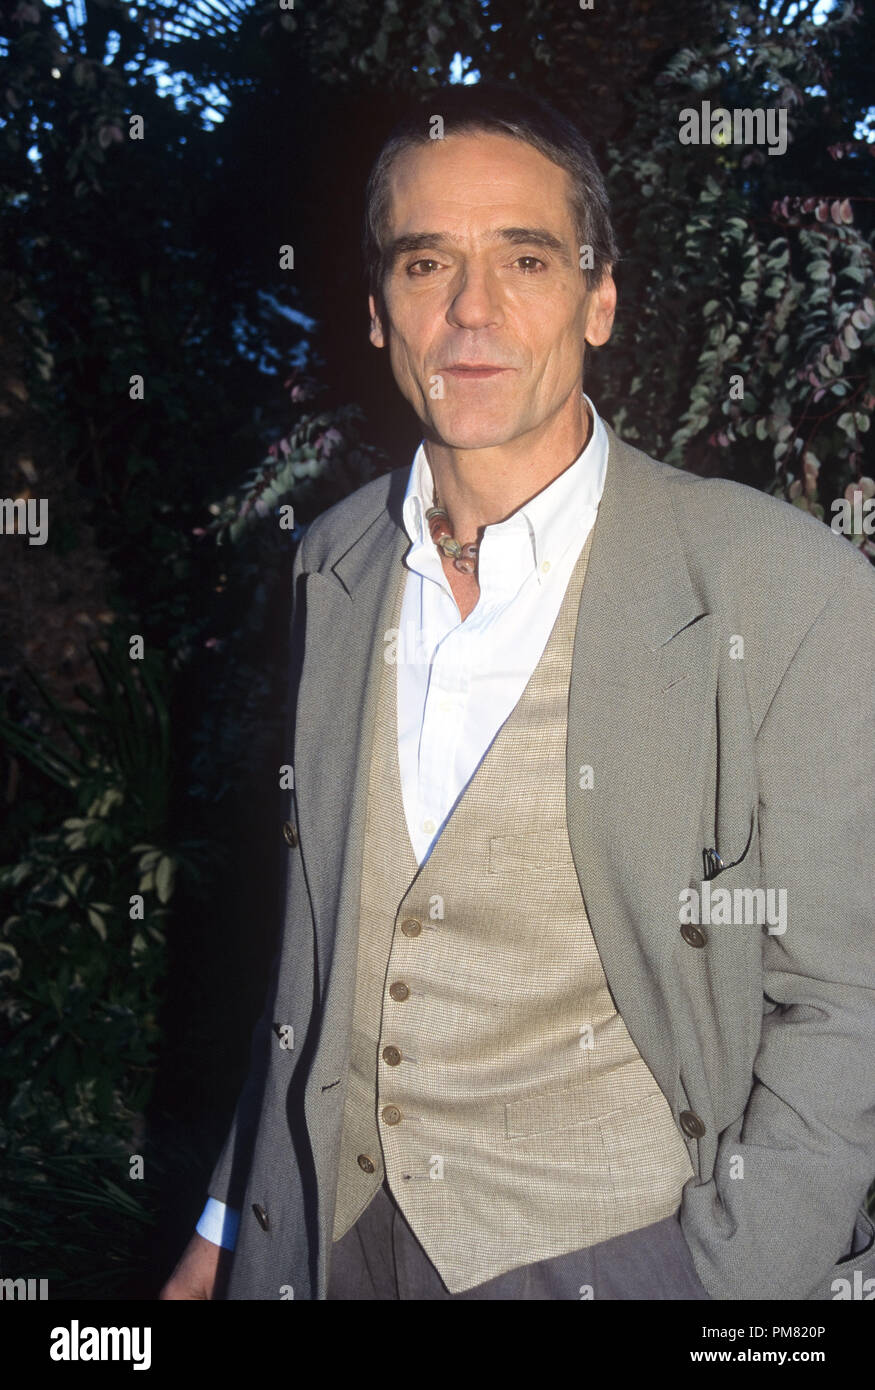 Jeremy Irons, 2004. Reproduction by American tabloids is absolutely forbidden. © JRC /The Hollywood Archive  -  All Rights Reserved  File Reference # 31315 163 Stock Photo